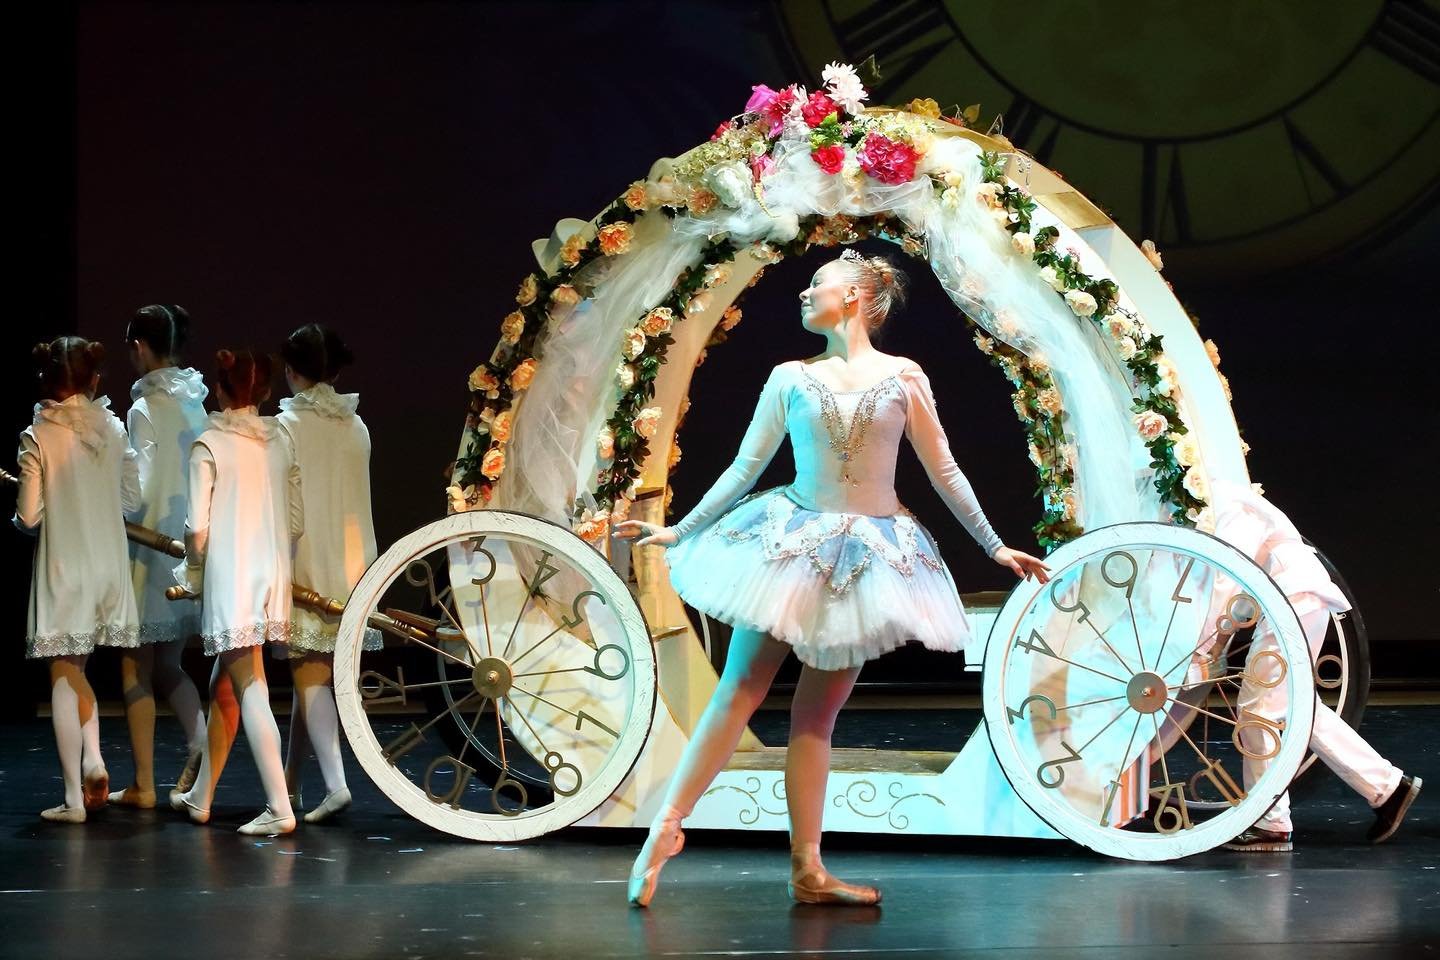 SYPG&rsquo;s Cinderella Ticket Giveaway 🤍

Enter for a chance to win 4 tickets to the 6 p.m. performance of SYPG&rsquo;s Cinderella on Saturday, April 13th and a Cinderella Gift Basket! 🕰️✨🩰

⭐️ HOW TO ENTER
1️⃣ Follow @sypgfoundation
2️⃣ Share th